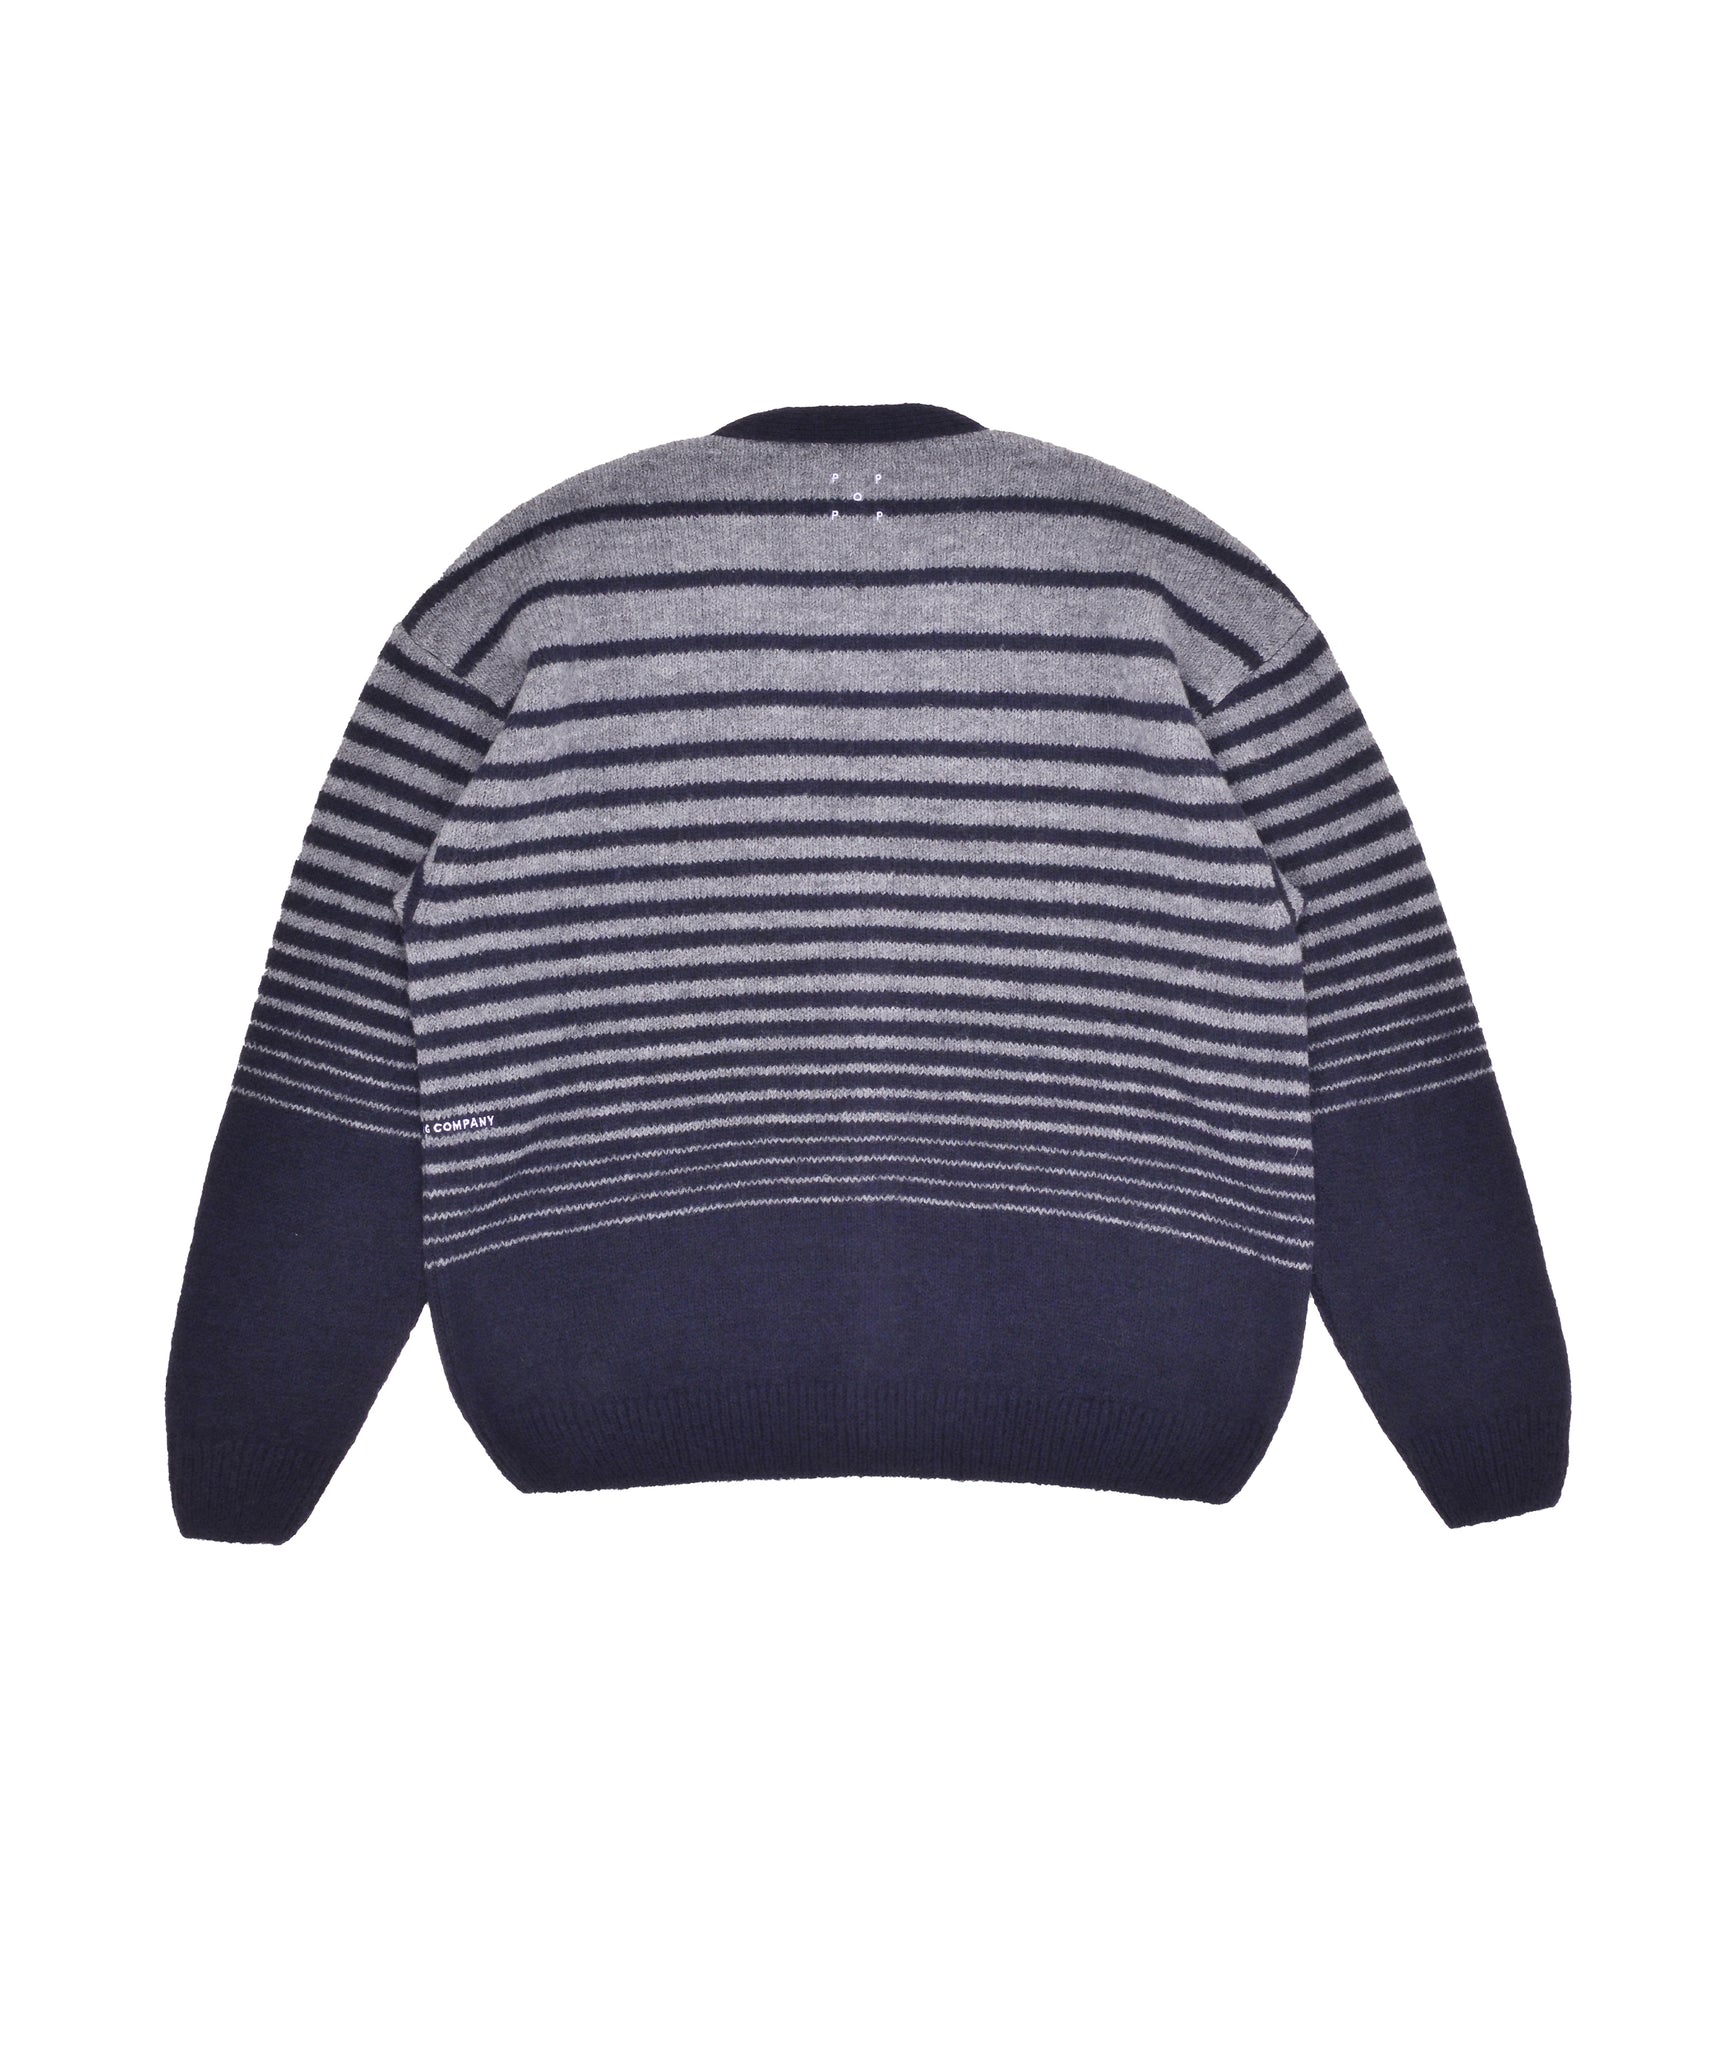 Knitted Cardigan - Navy/Grey